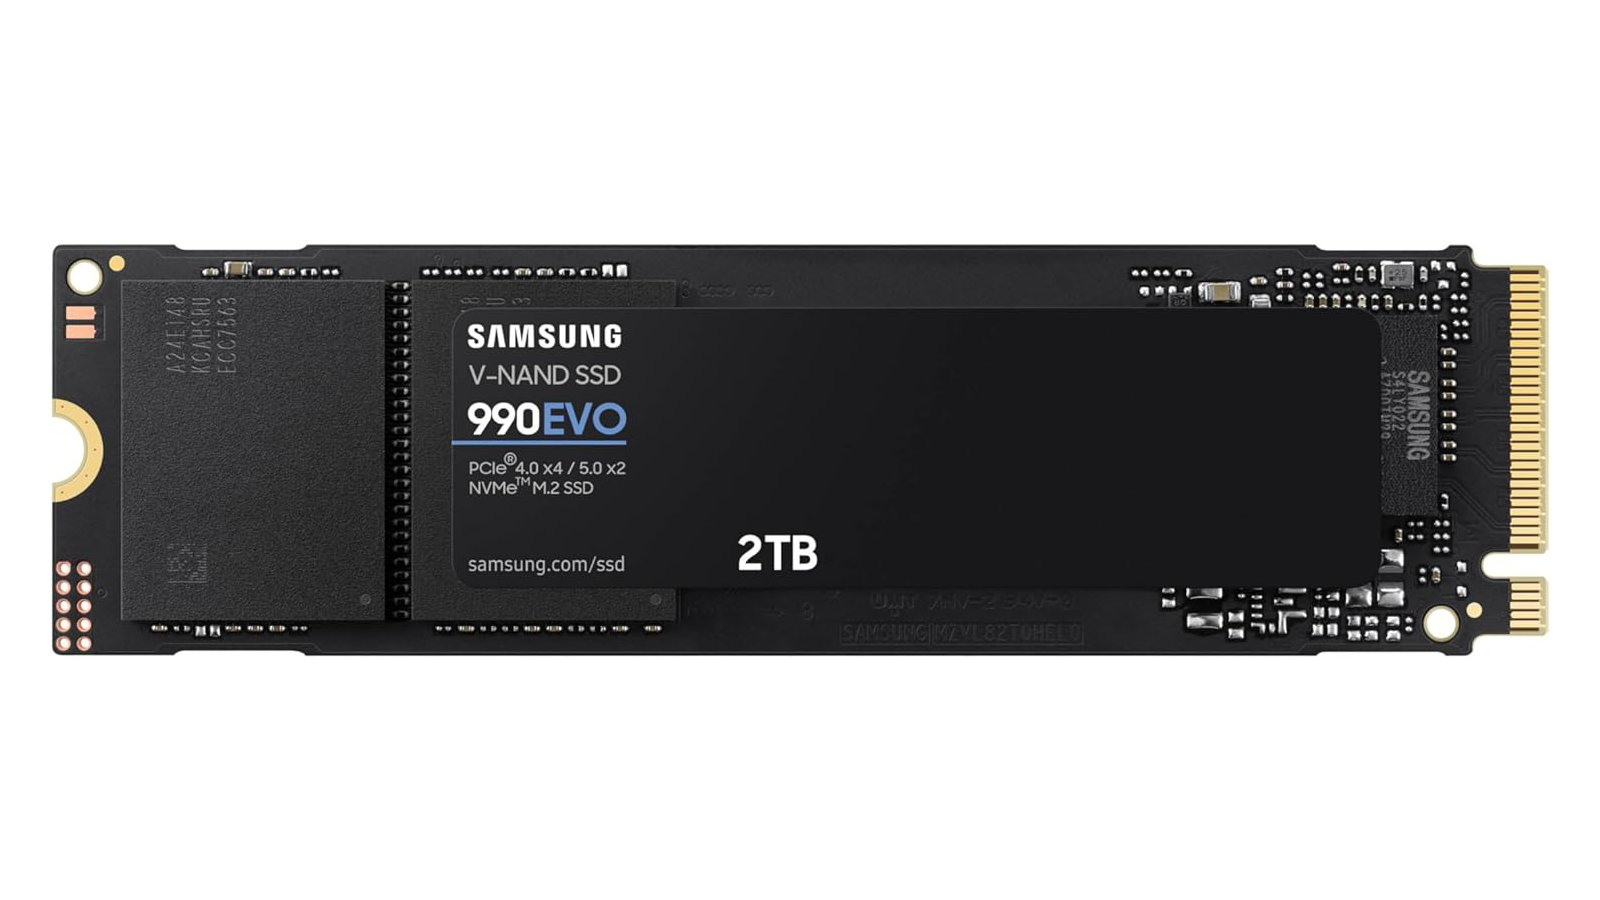 Samsung 990 Evo SSD product photo against a white background.